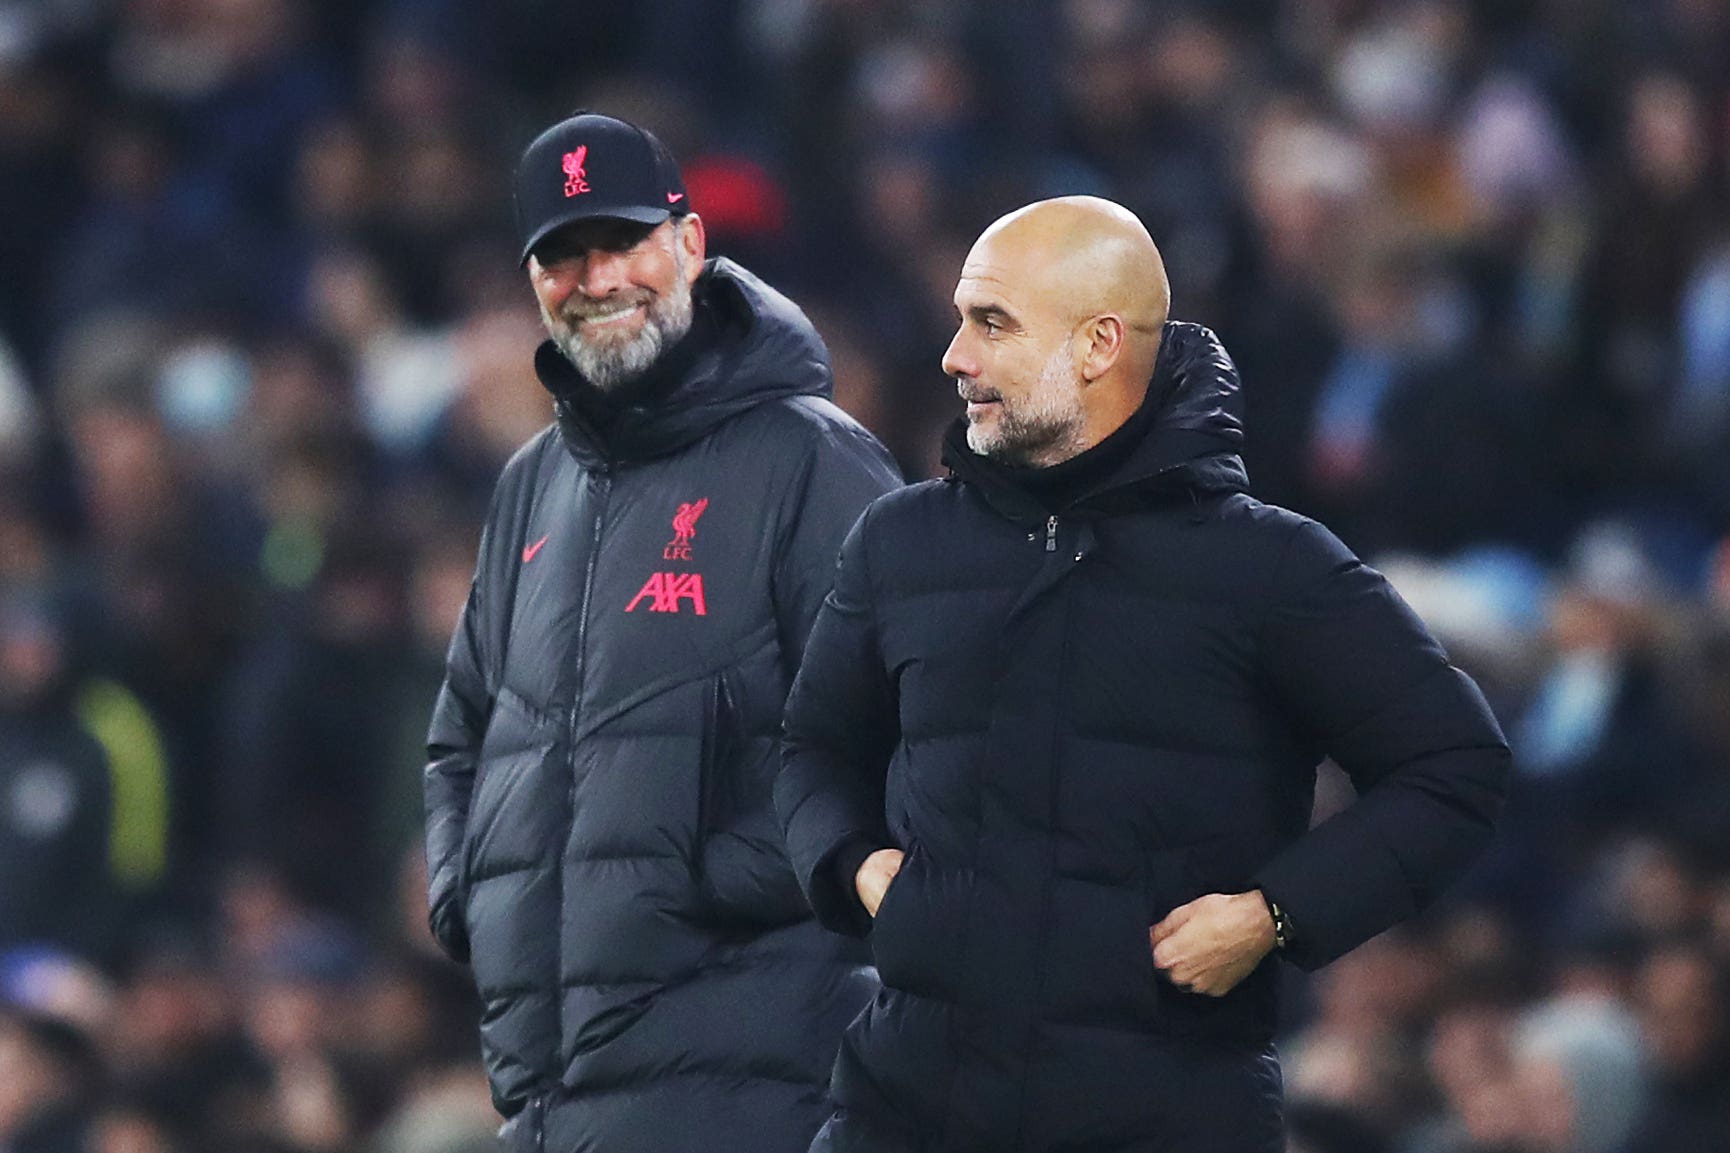 Jurgen Klopp’s Liverpool are the only team to have got close to Manchester City’s levels in England